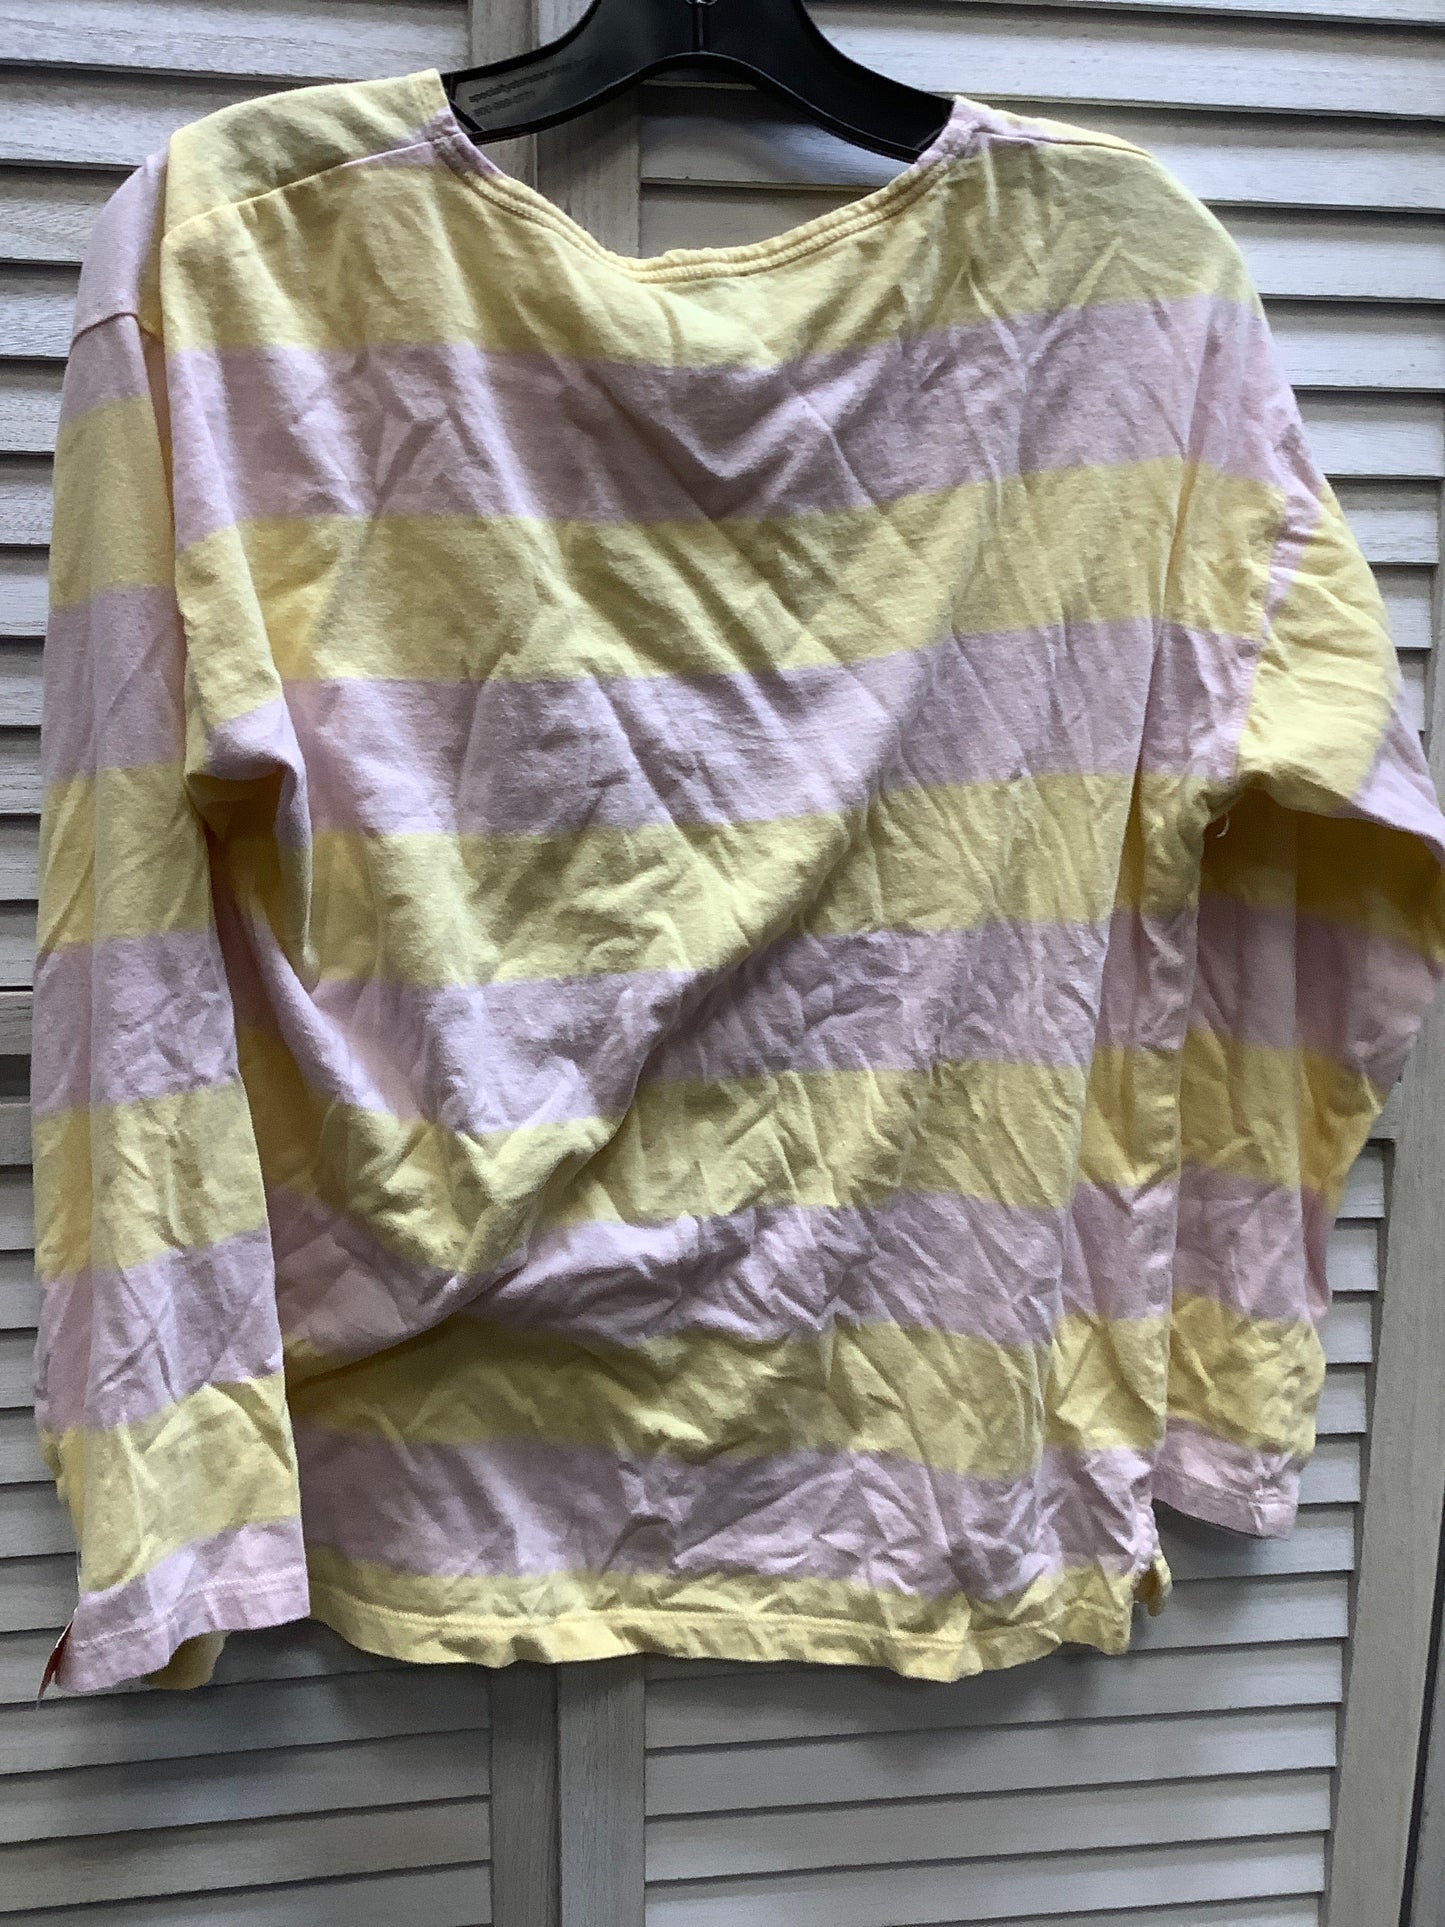 Pink & Yellow Top Long Sleeve J. Crew, Size M